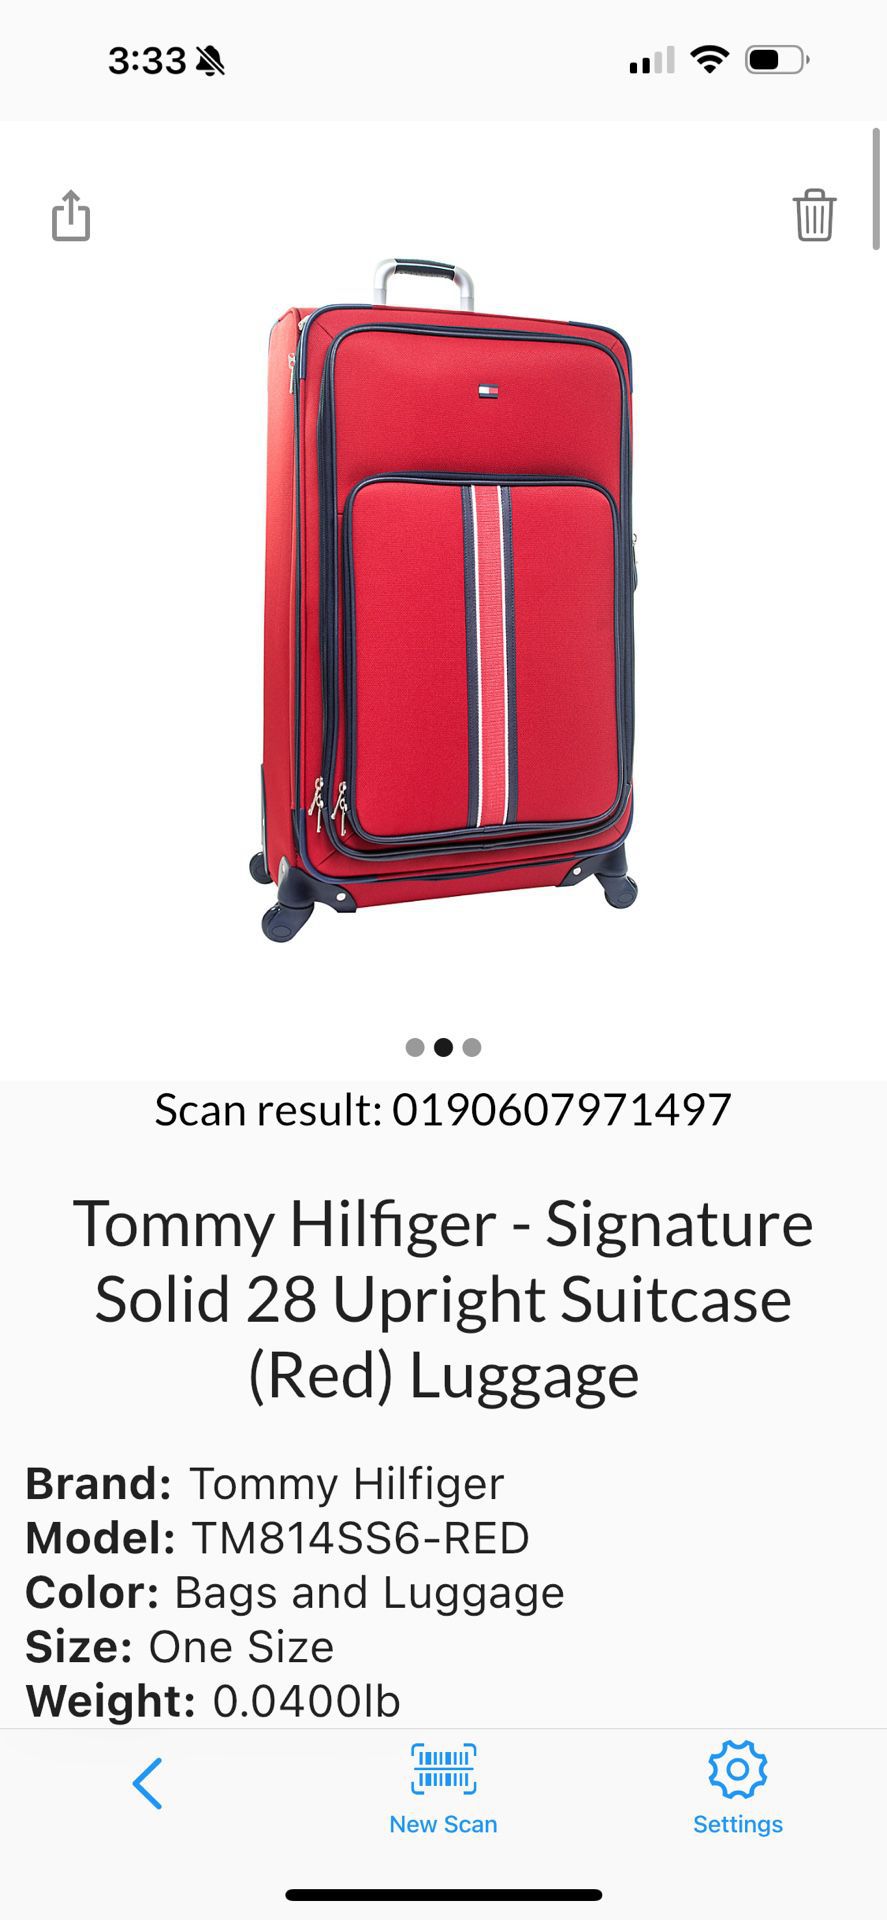 Tommy Hilfiger - Signature Solid 28 Luggage 